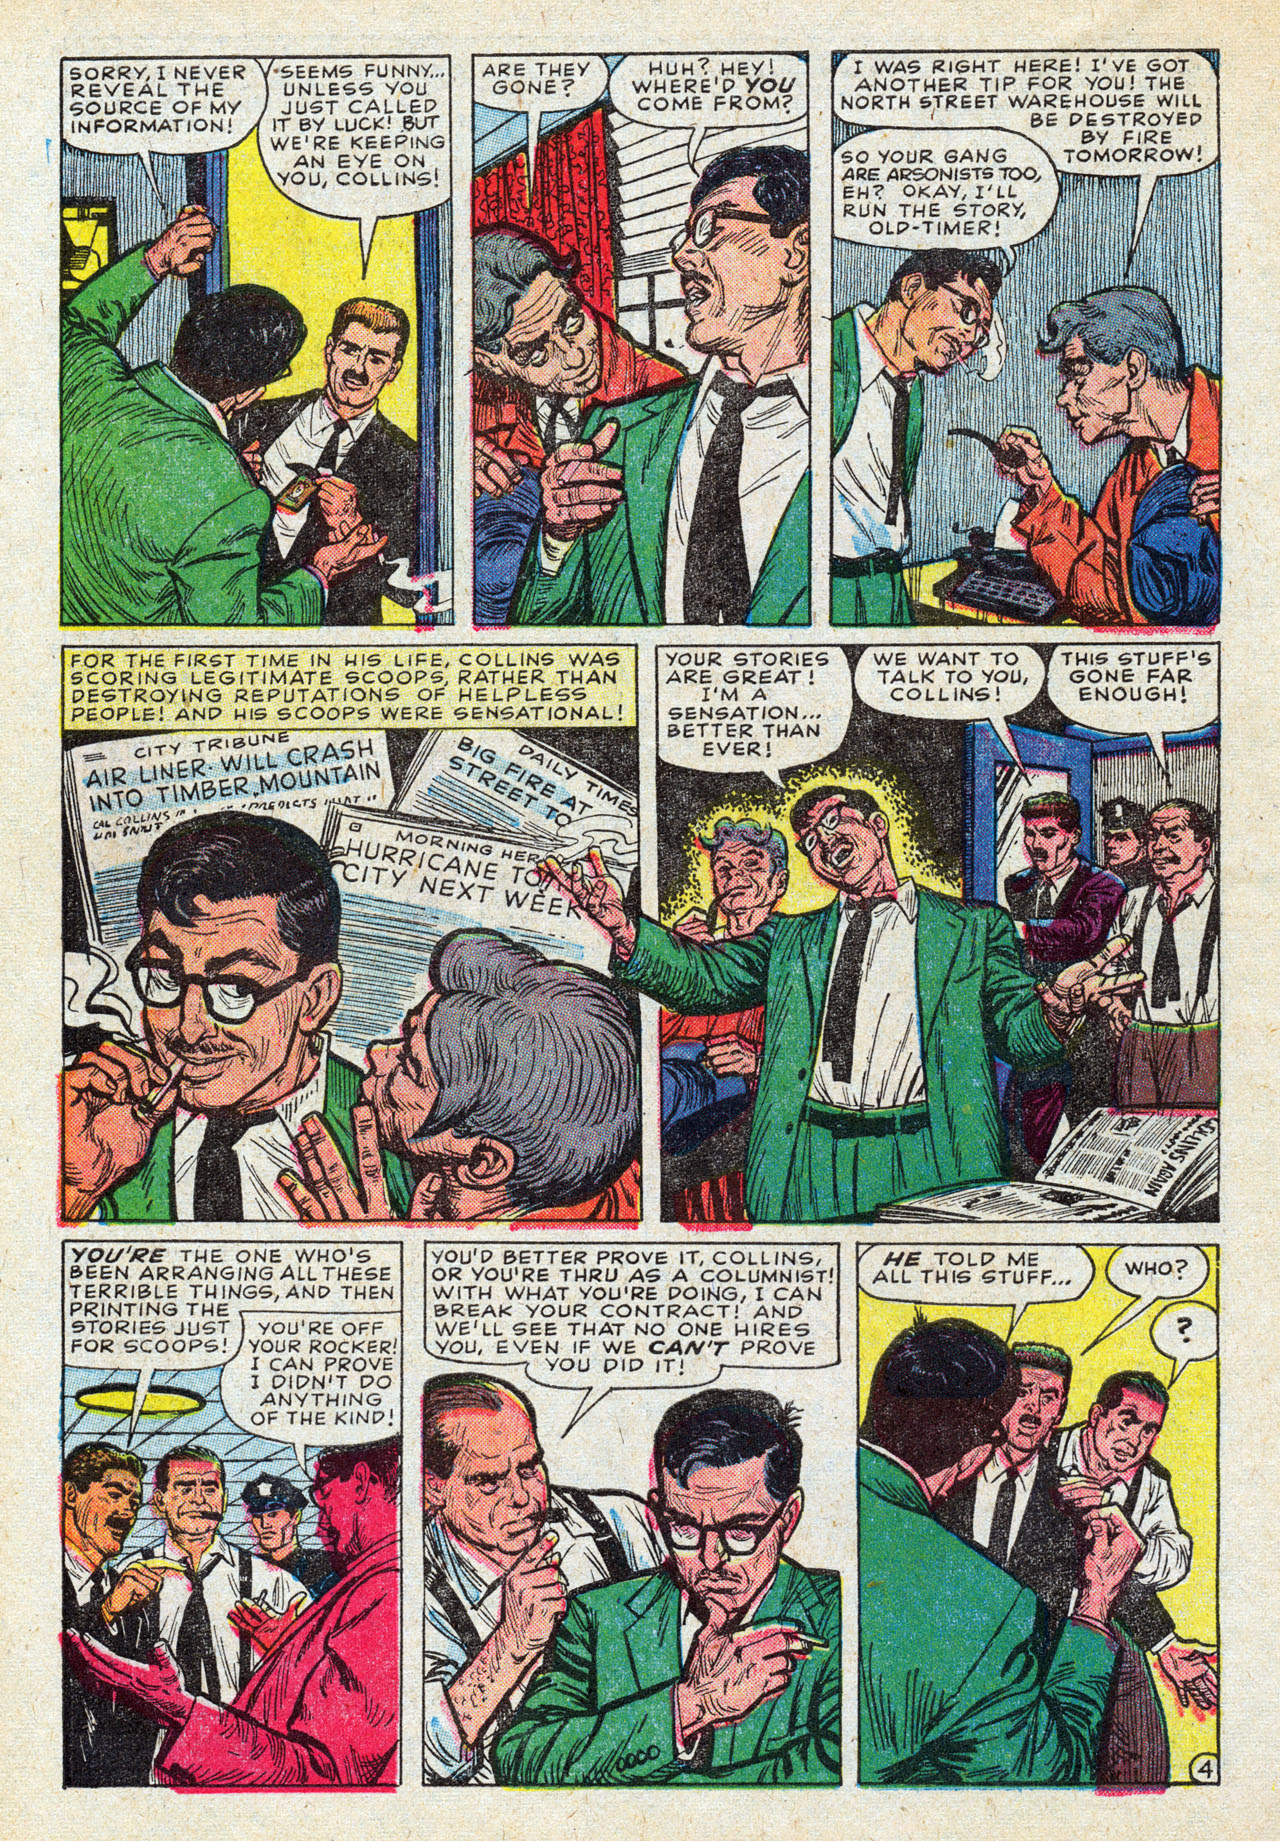 Marvel Tales (1949) 132 Page 5